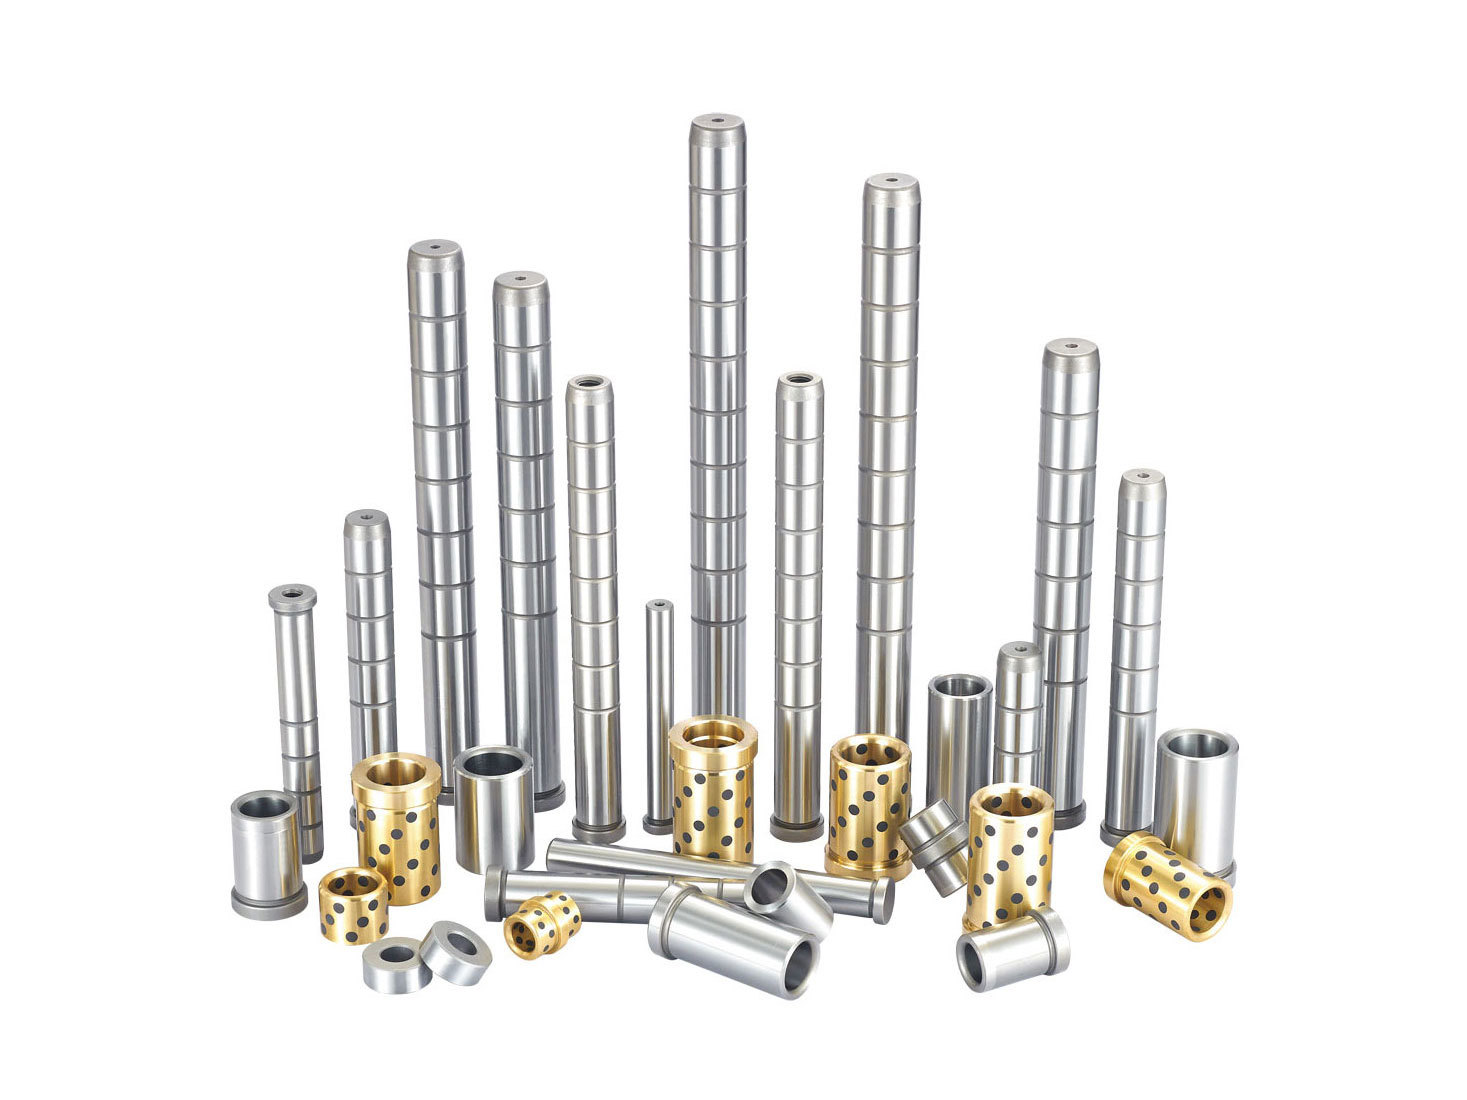 Straight bush Manufacturers china talks about the design principles of bushings